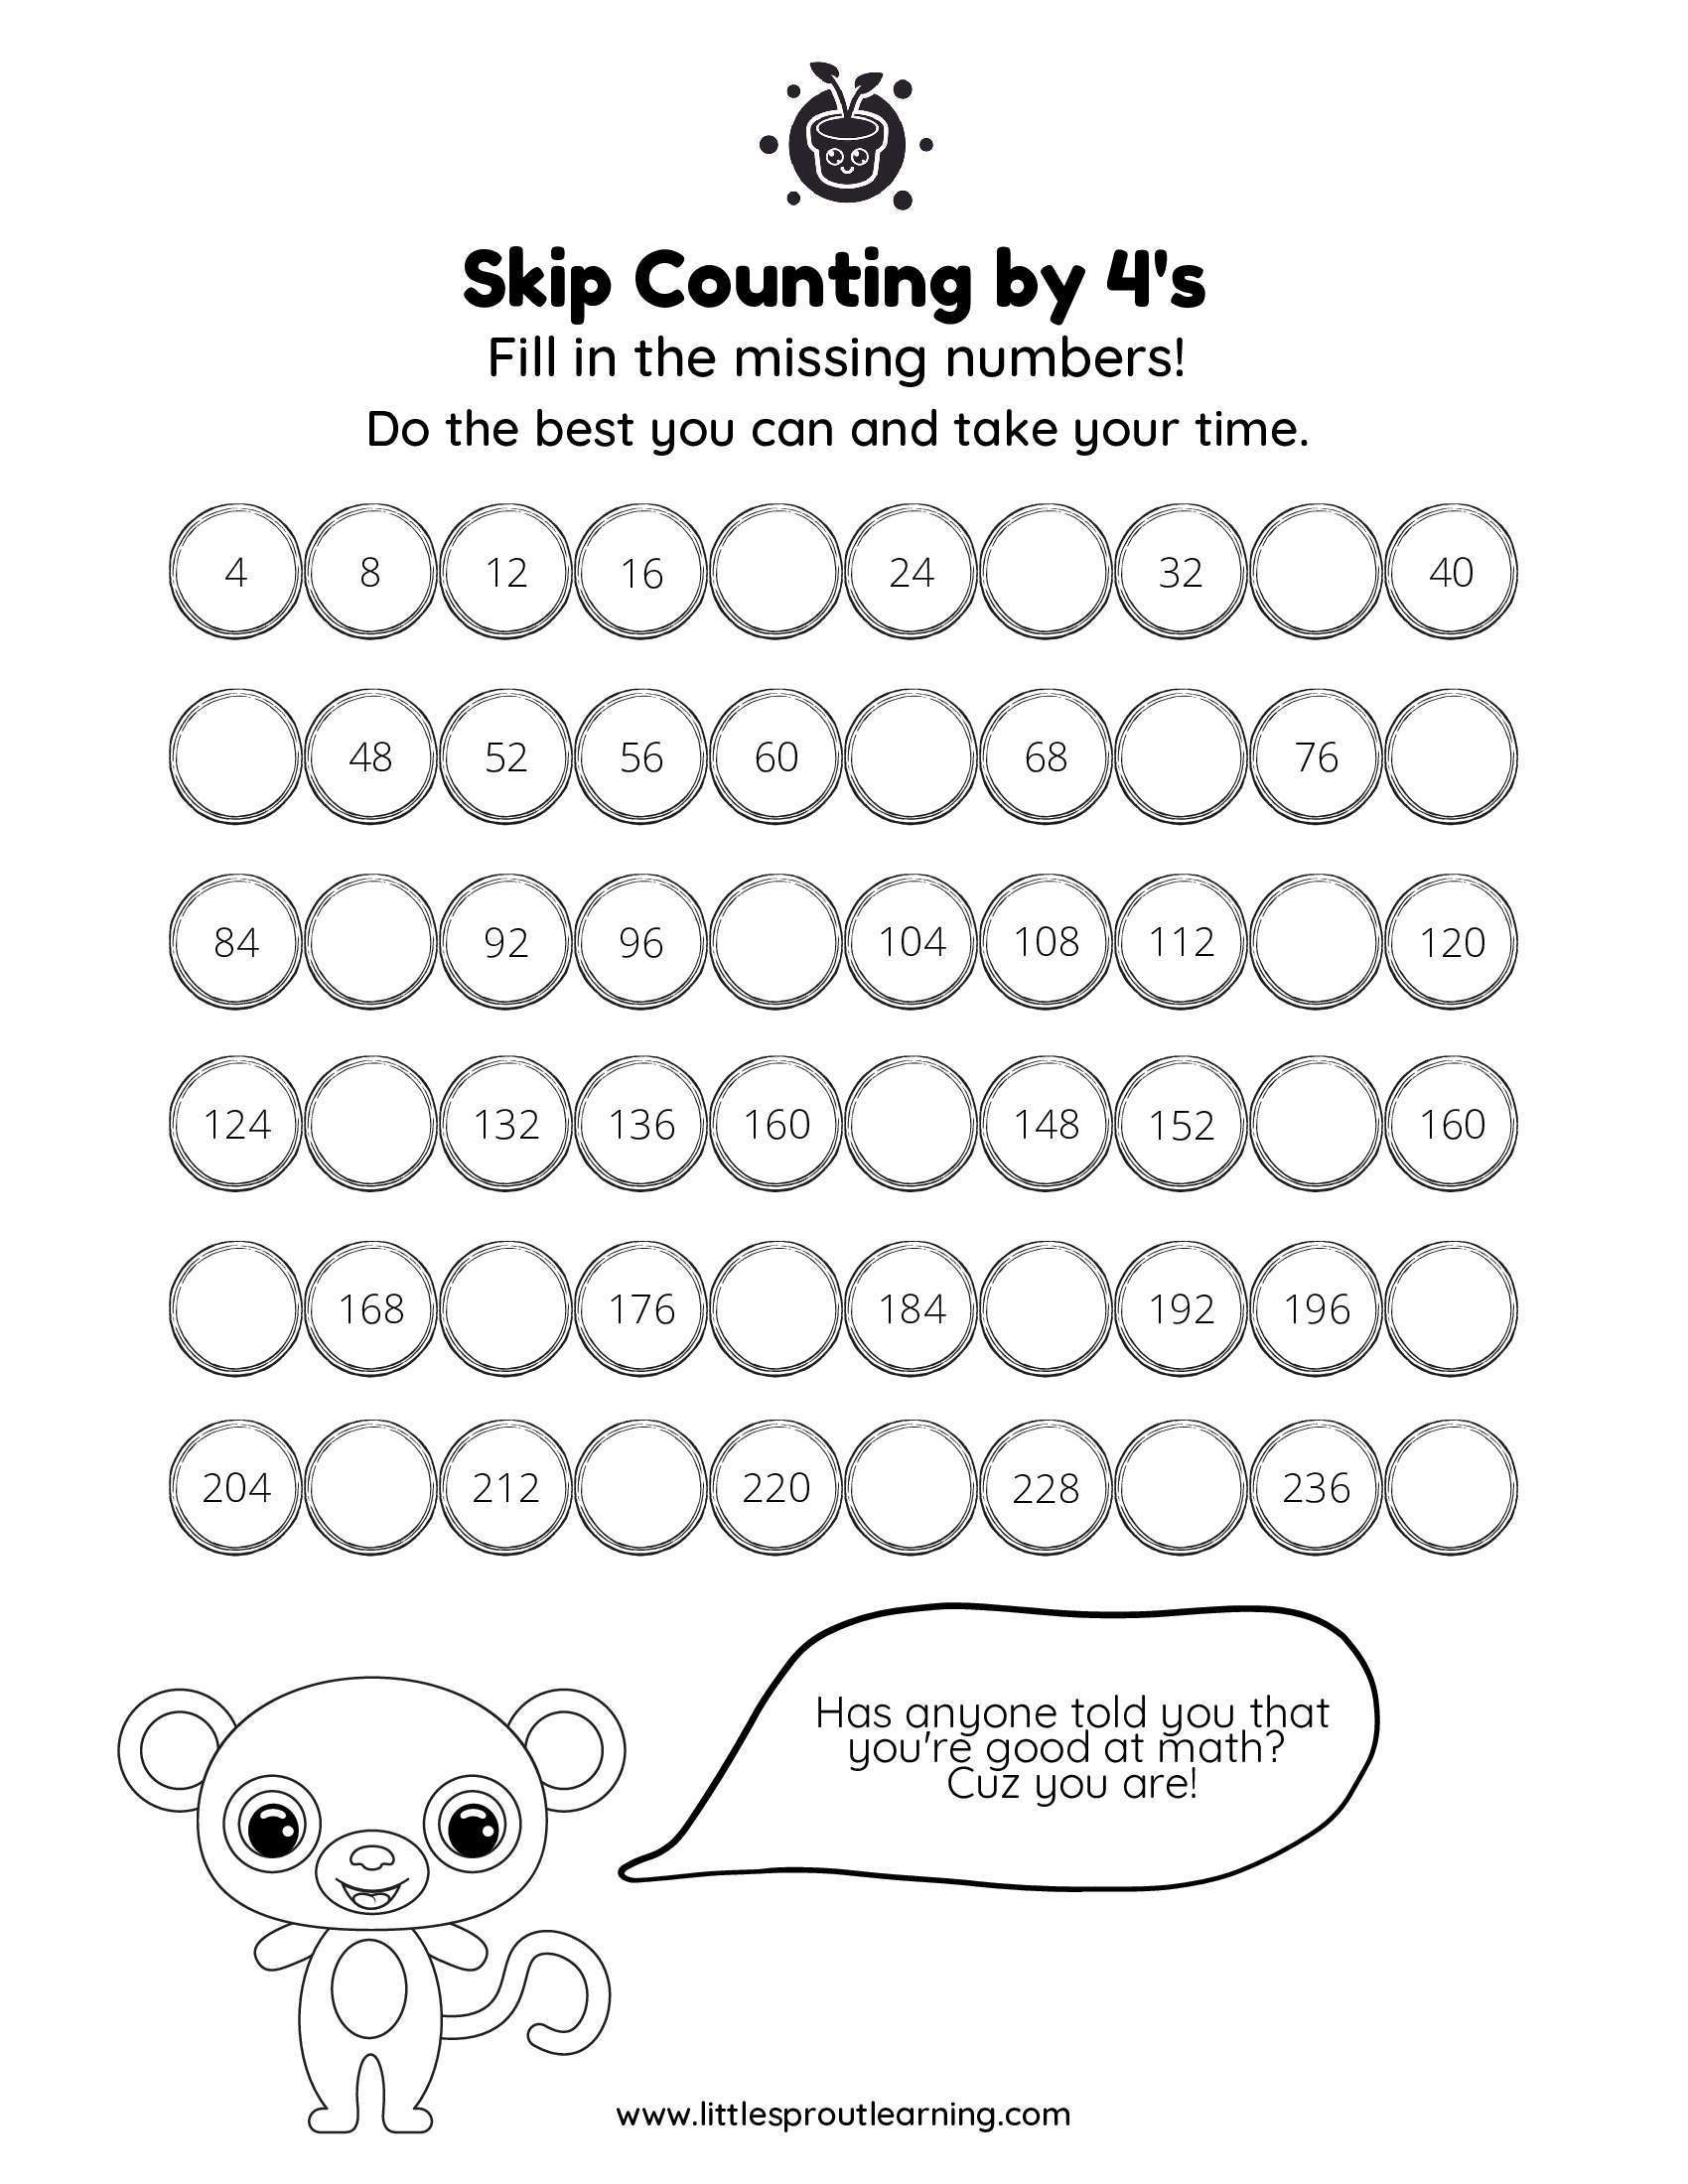 Skip Counting by 4’s